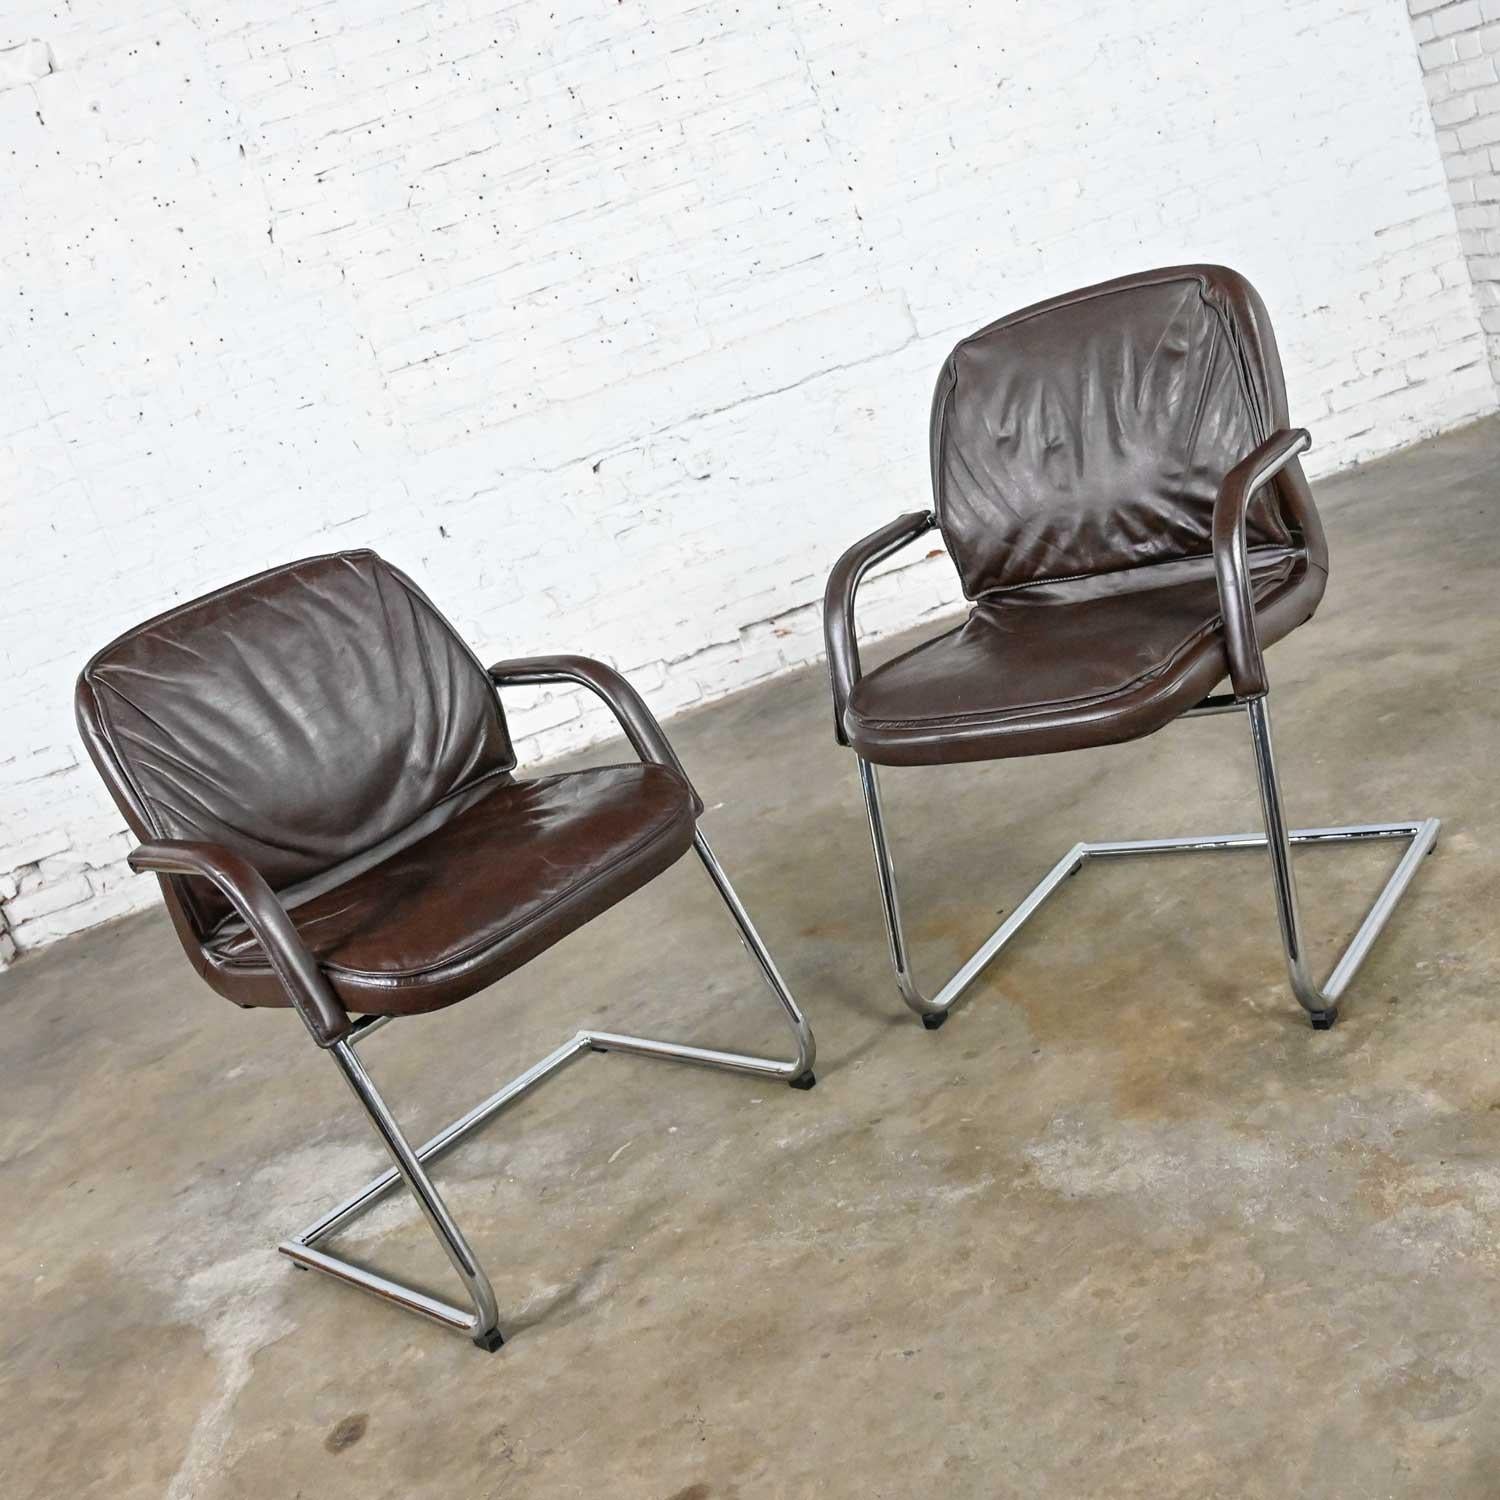 Handsome vintage modern Vecta Contract brown leather & chrome cantilever pair of chairs. Beautiful condition, keeping in mind that these are vintage and not new so will have signs of use and wear. Please see photos and zoom in for details. We